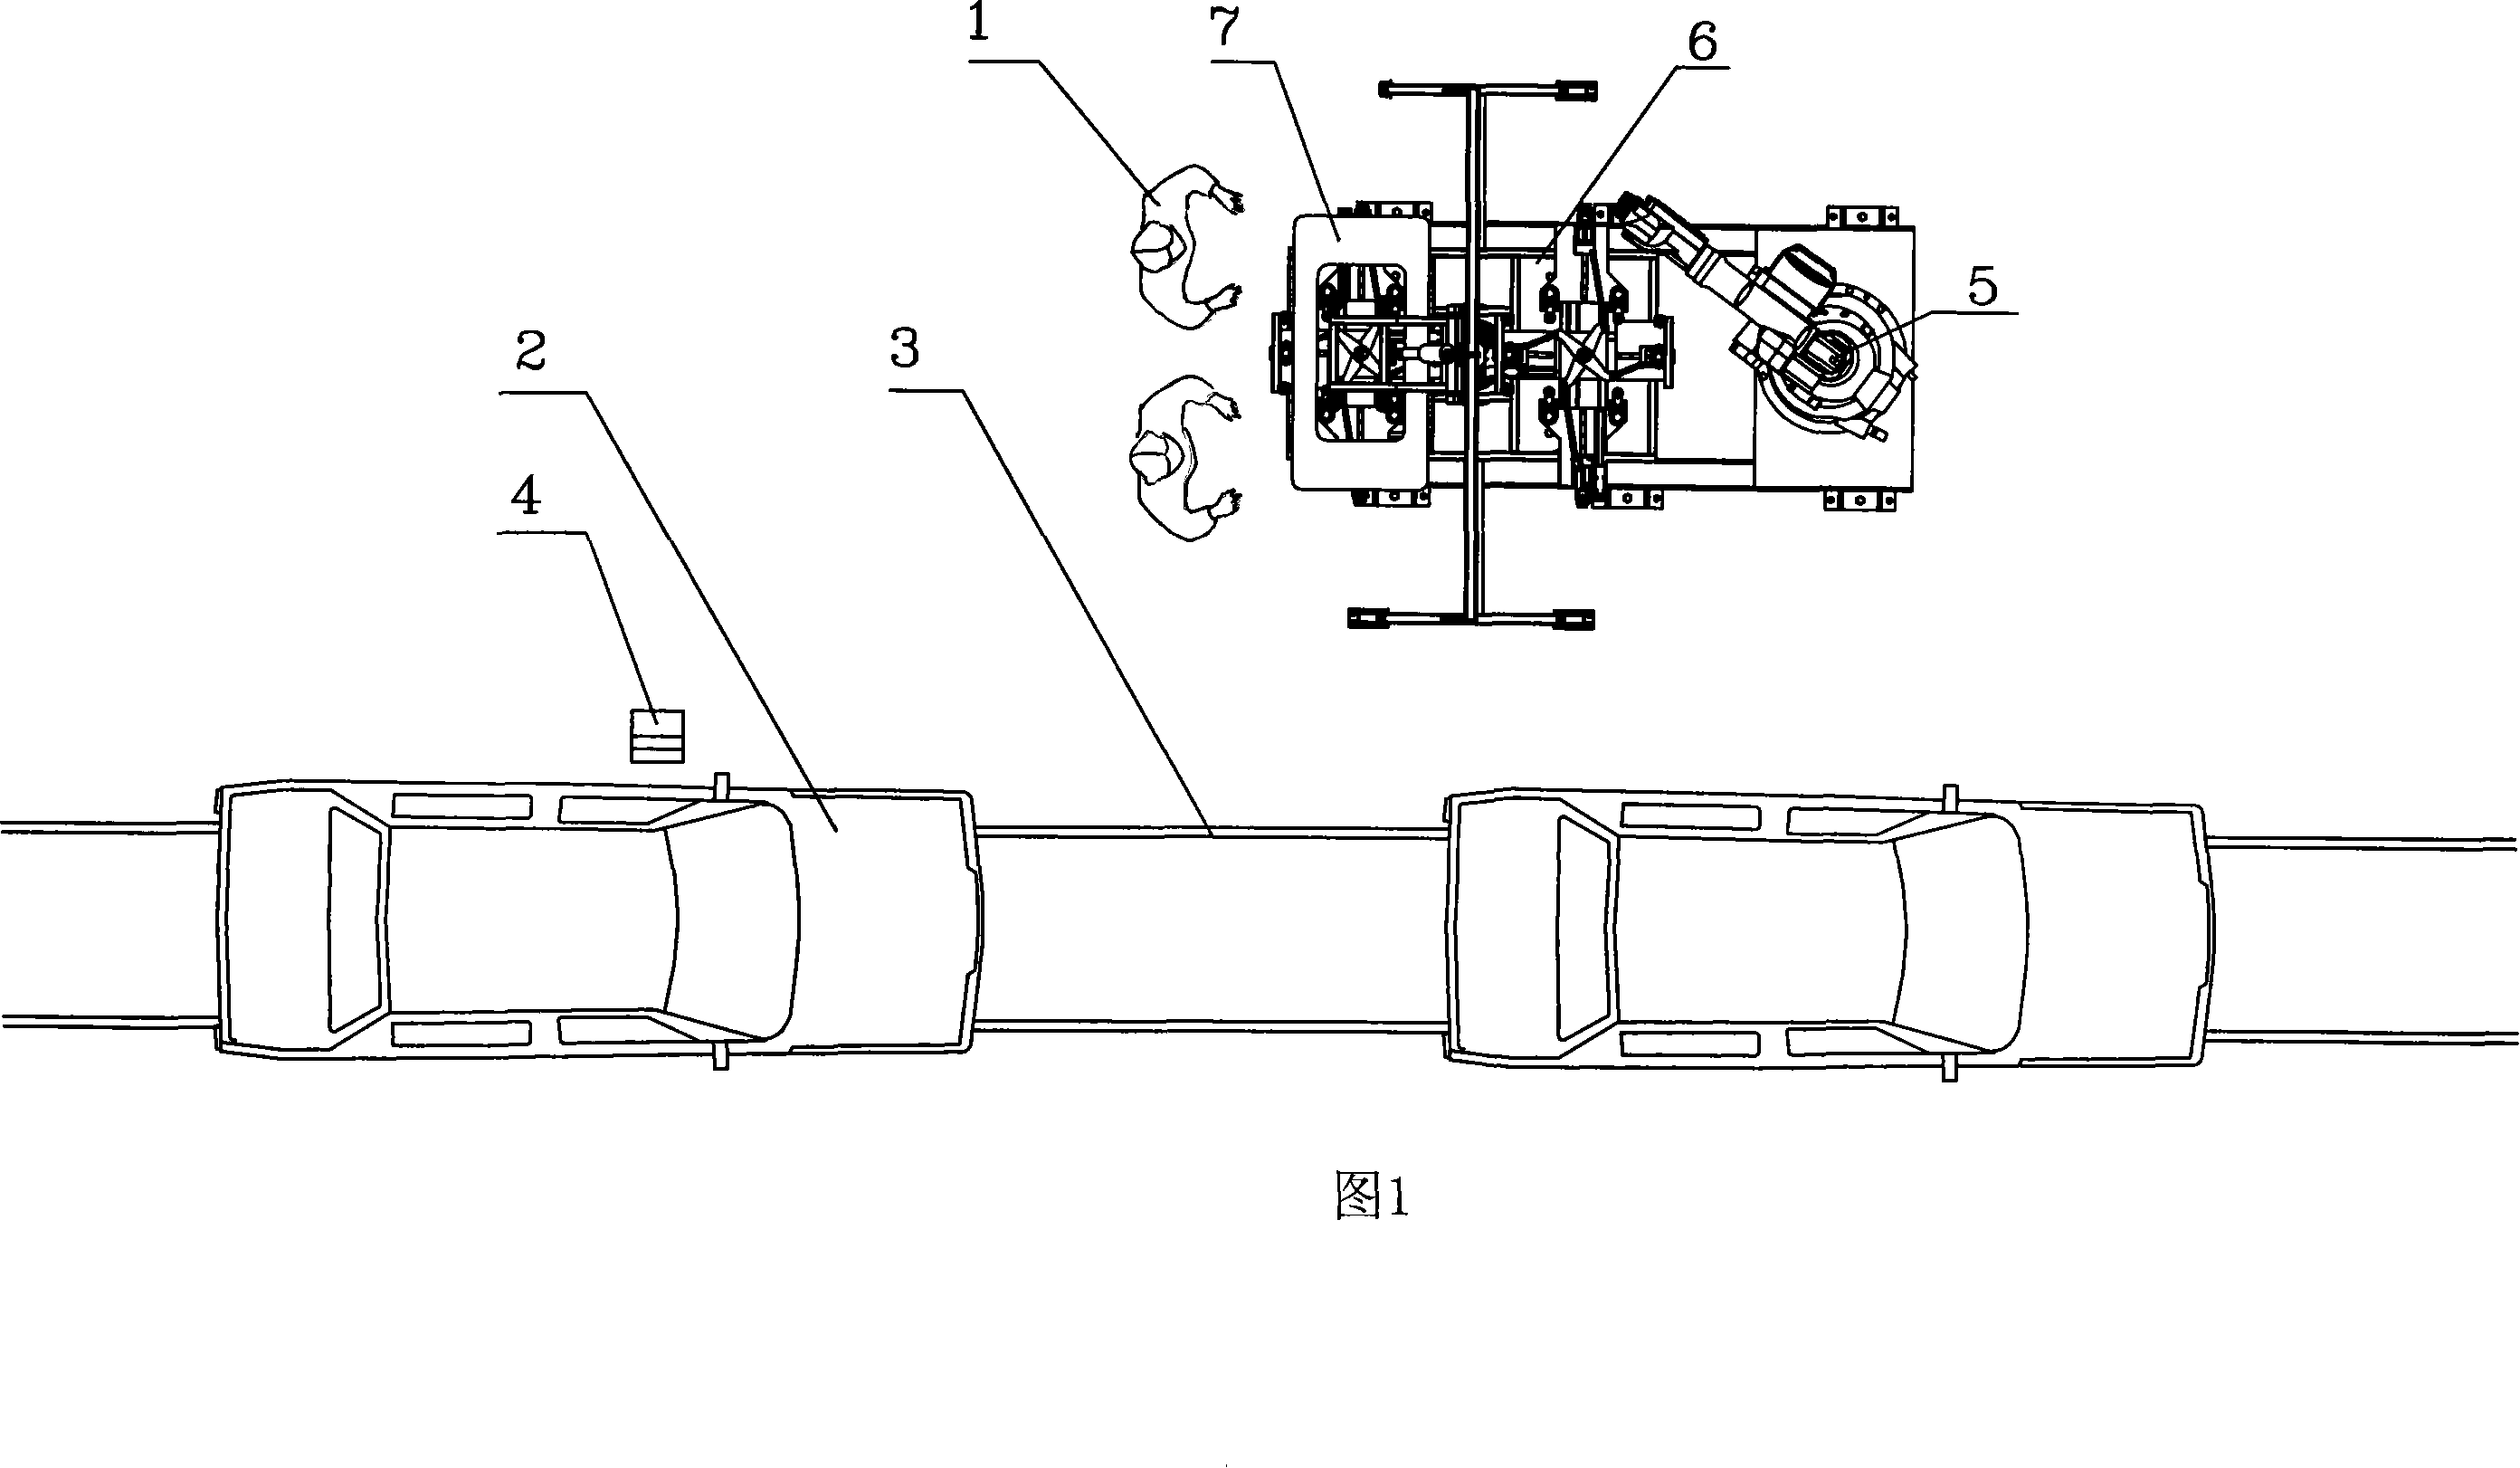 Automobile wind shield glass mounting method based on automatic glue application and artificial mounting